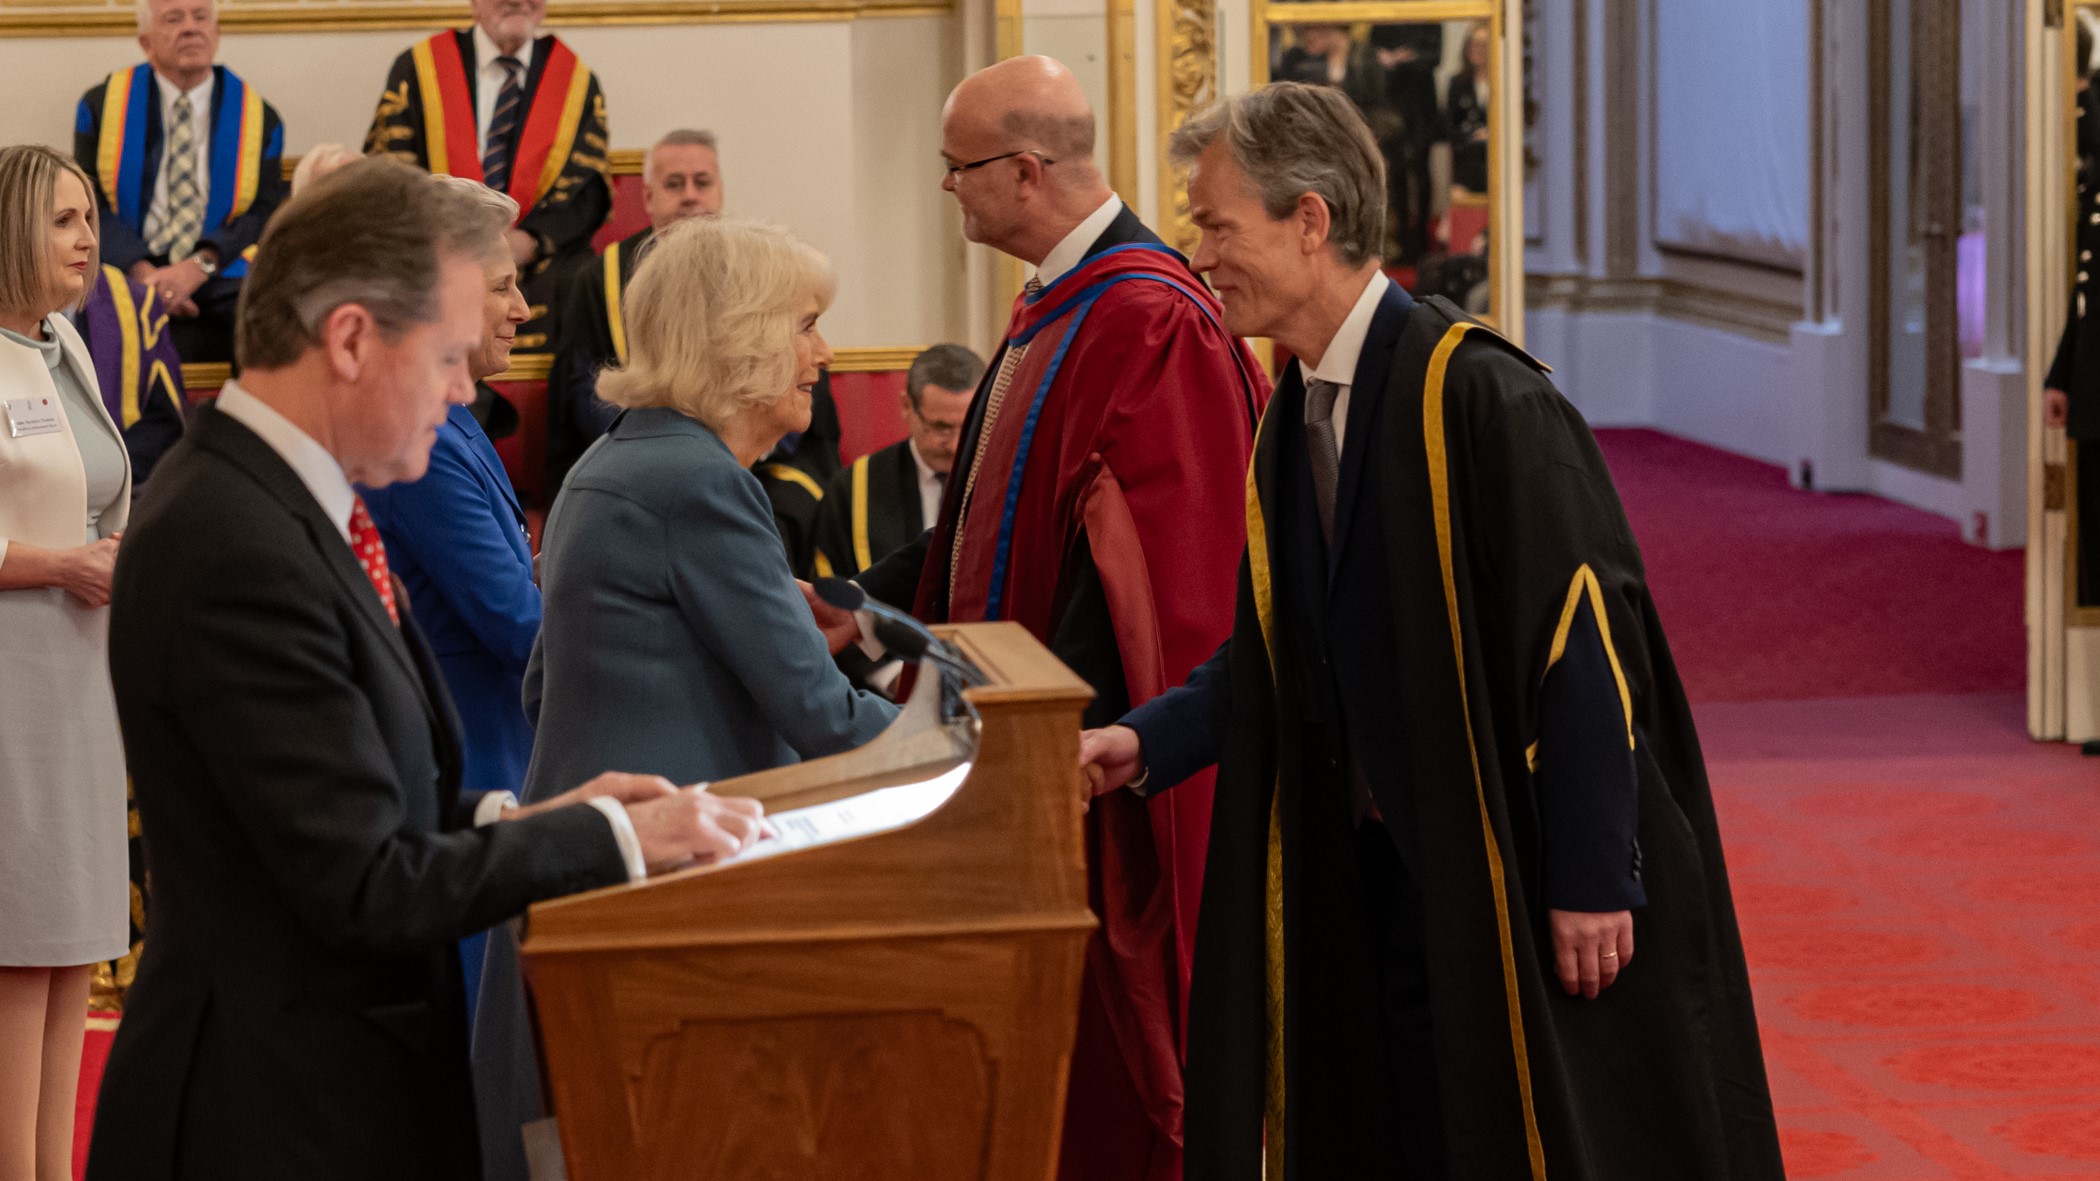 The ICR's CEO and Head of Breast Cancer Research receiving the Queen's Anniversary Prize from Her Majesty The Queen